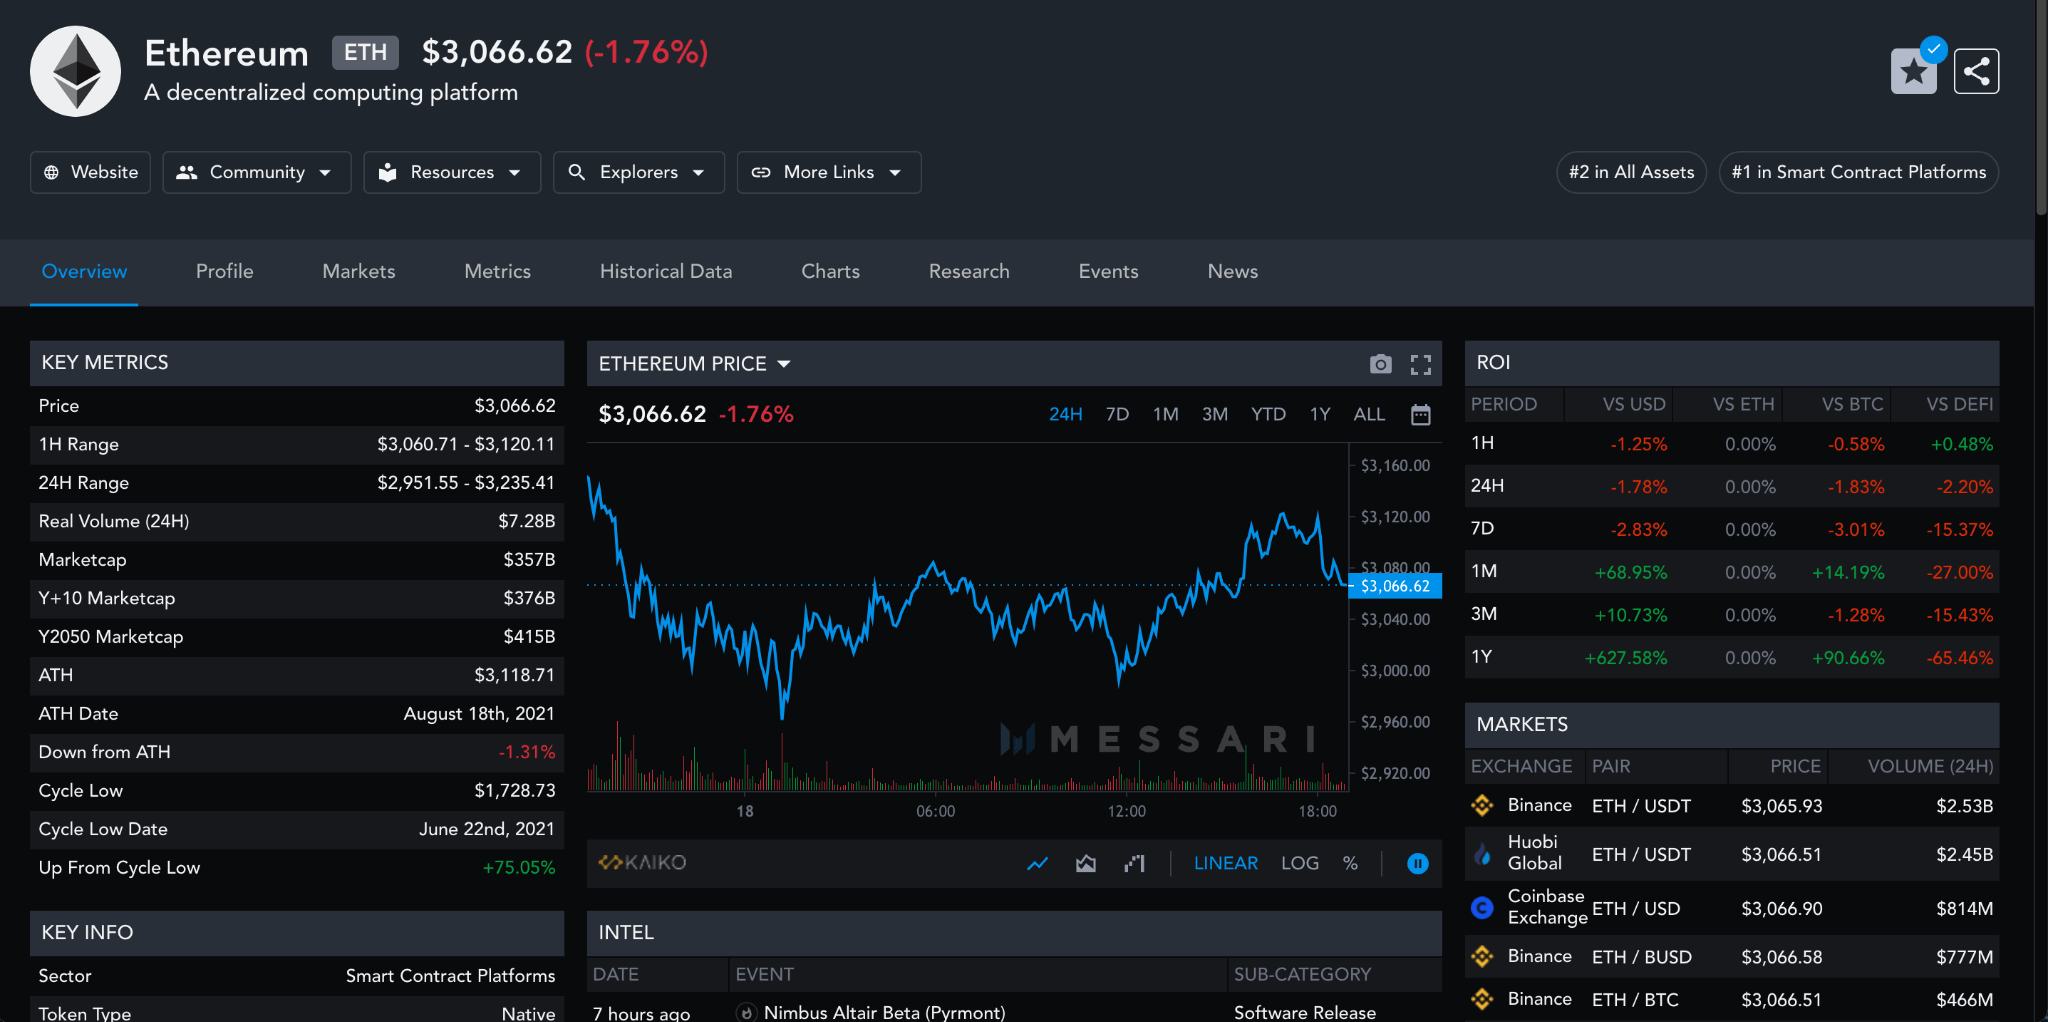 Messari dashboard with a dark background. The dashboard shows all available data about Ethereum, including real-time price, ROI, and key metrics like market cap and price.